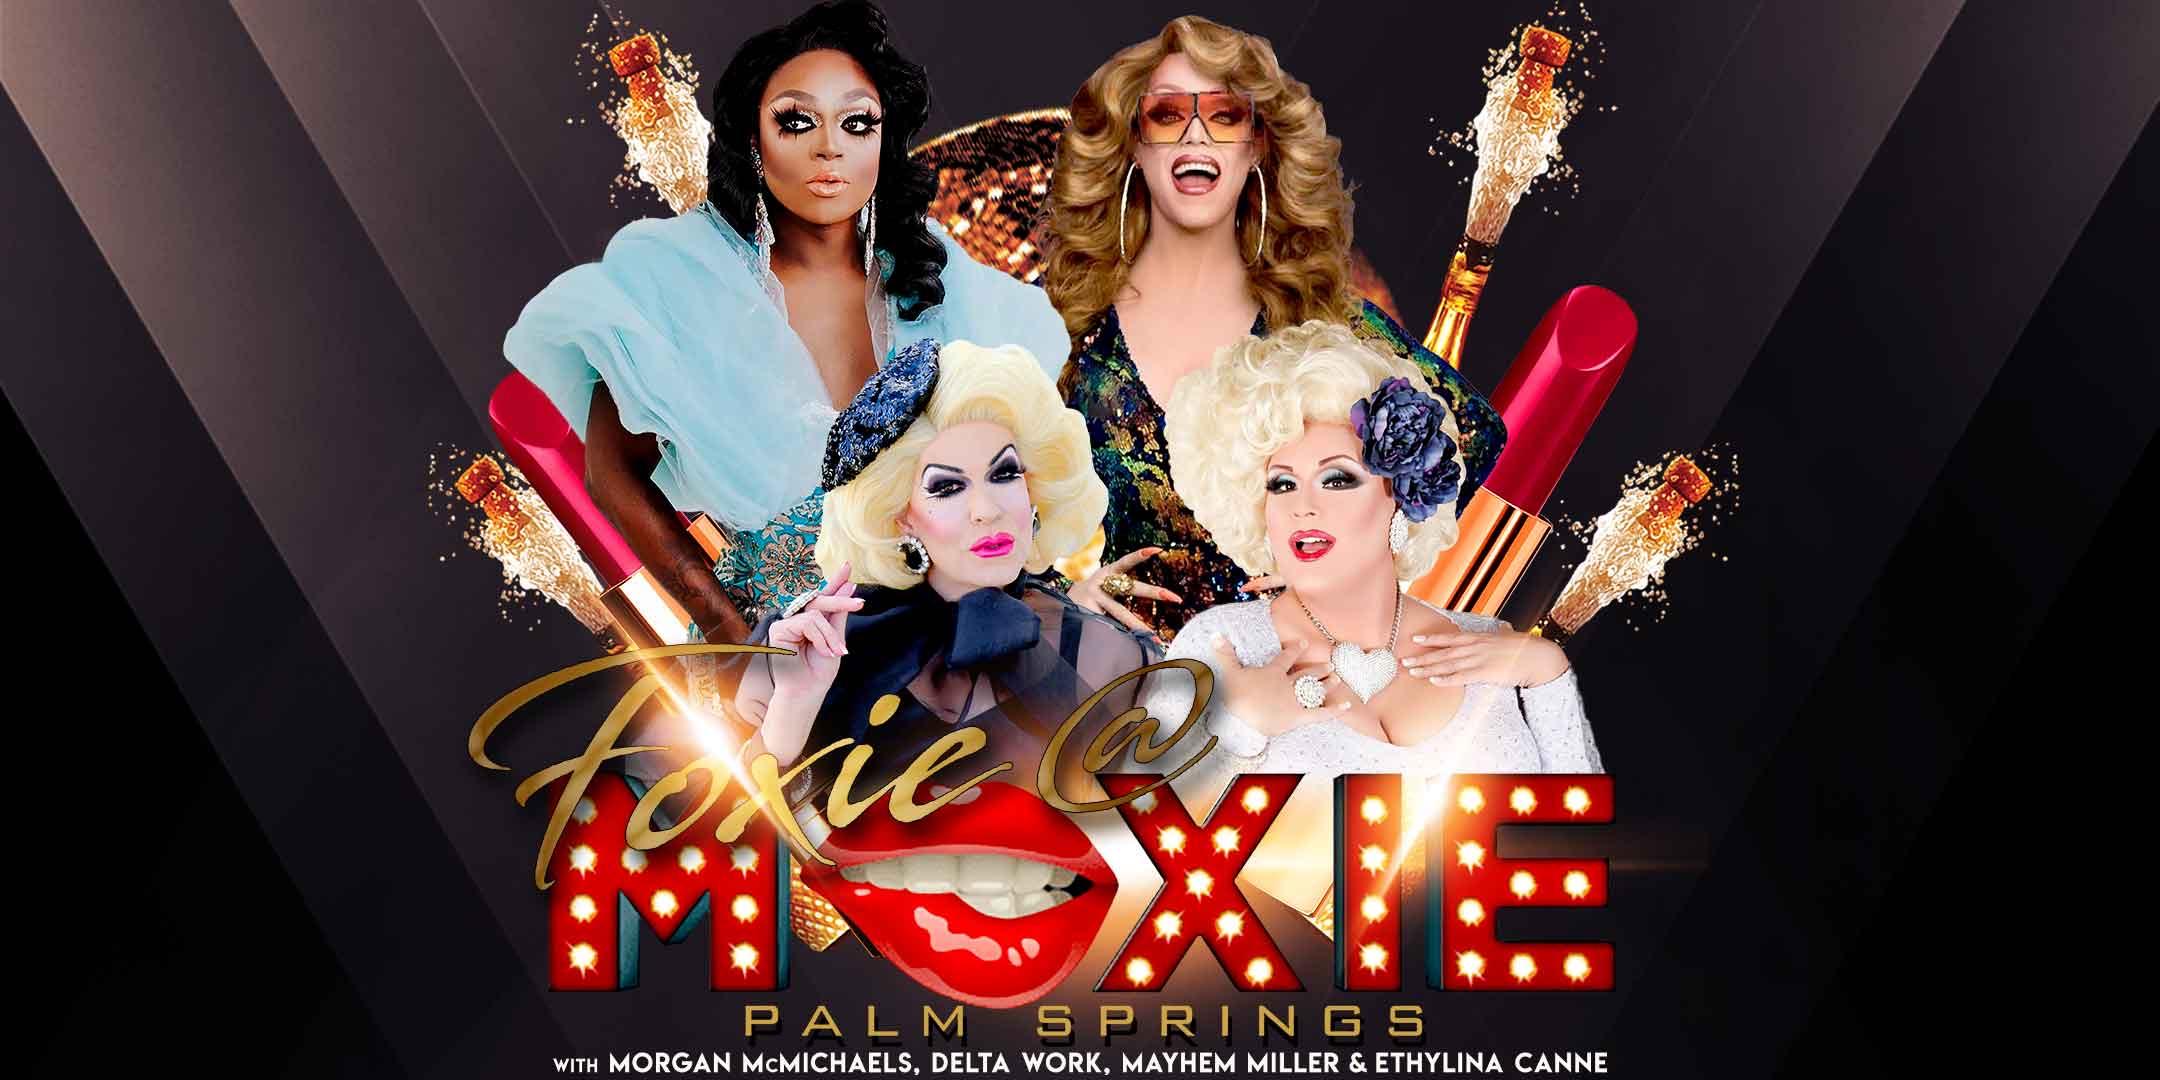 Morgan McMichaels, Delta Work & Ethylina Canne present Foxie @ Moxie with special Guests: LINE UP COMING SOON!